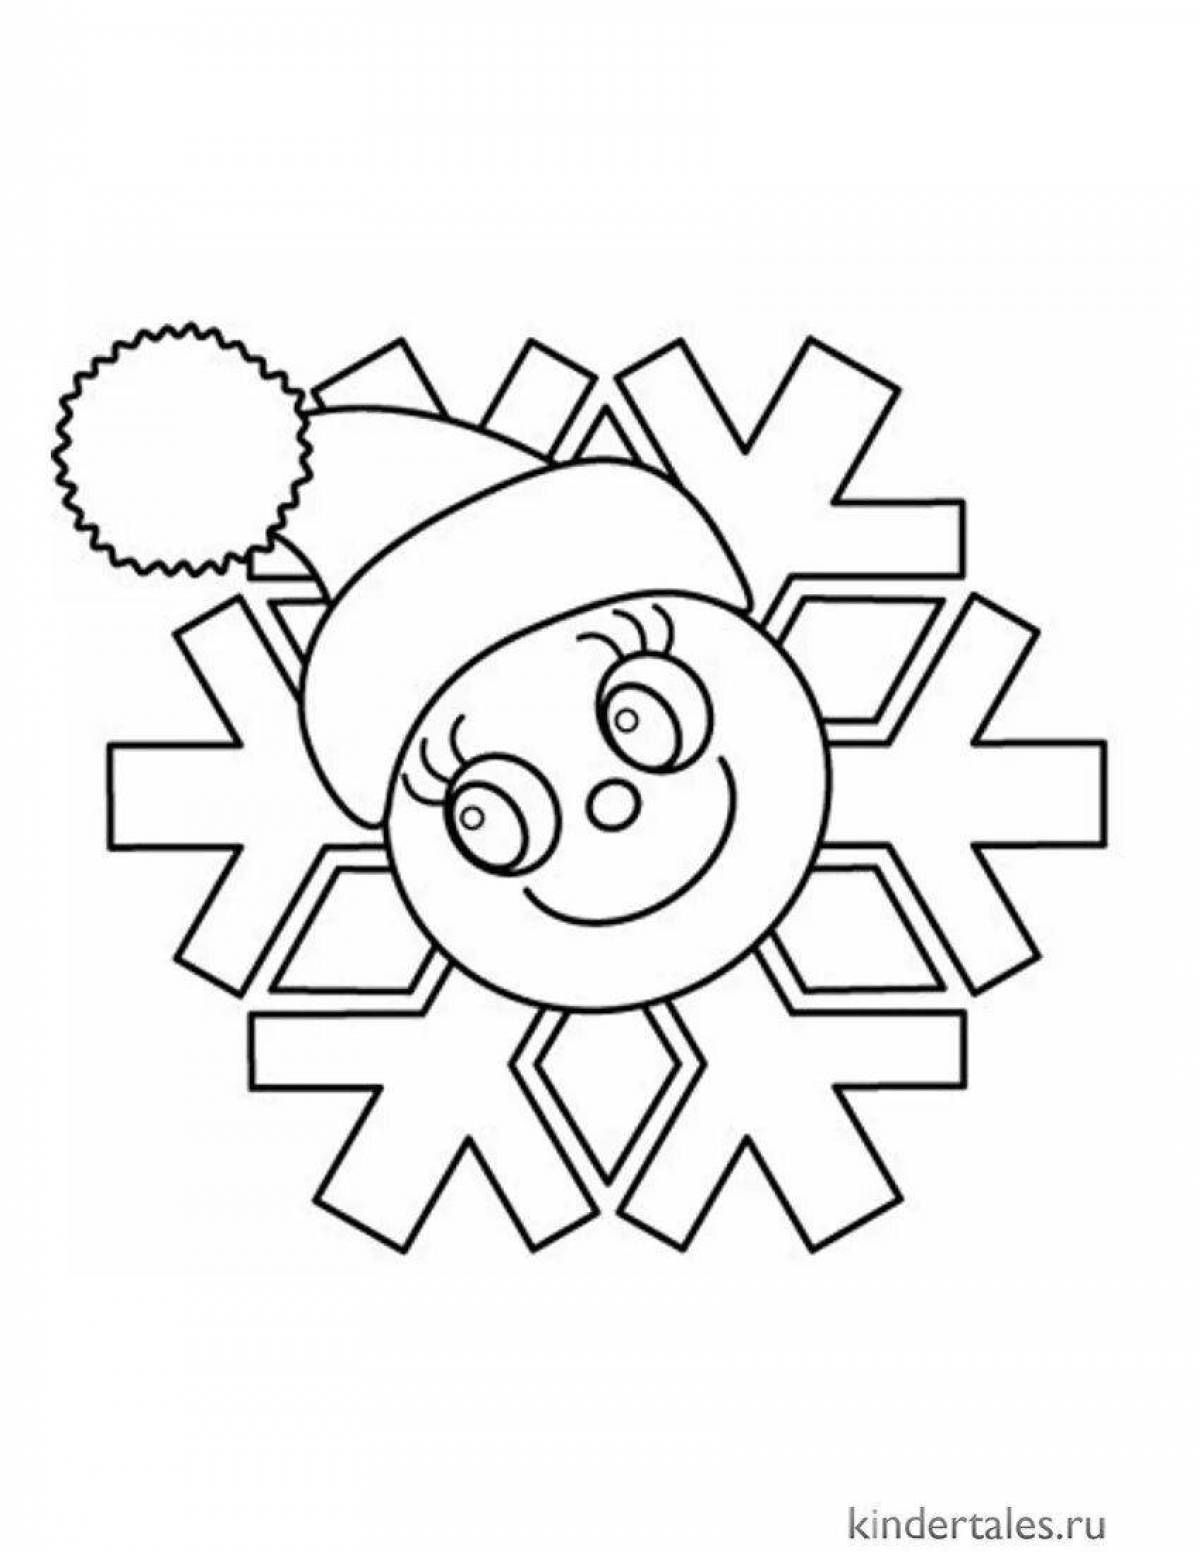 Glamorous snowflake coloring book for kids 4-5 years old